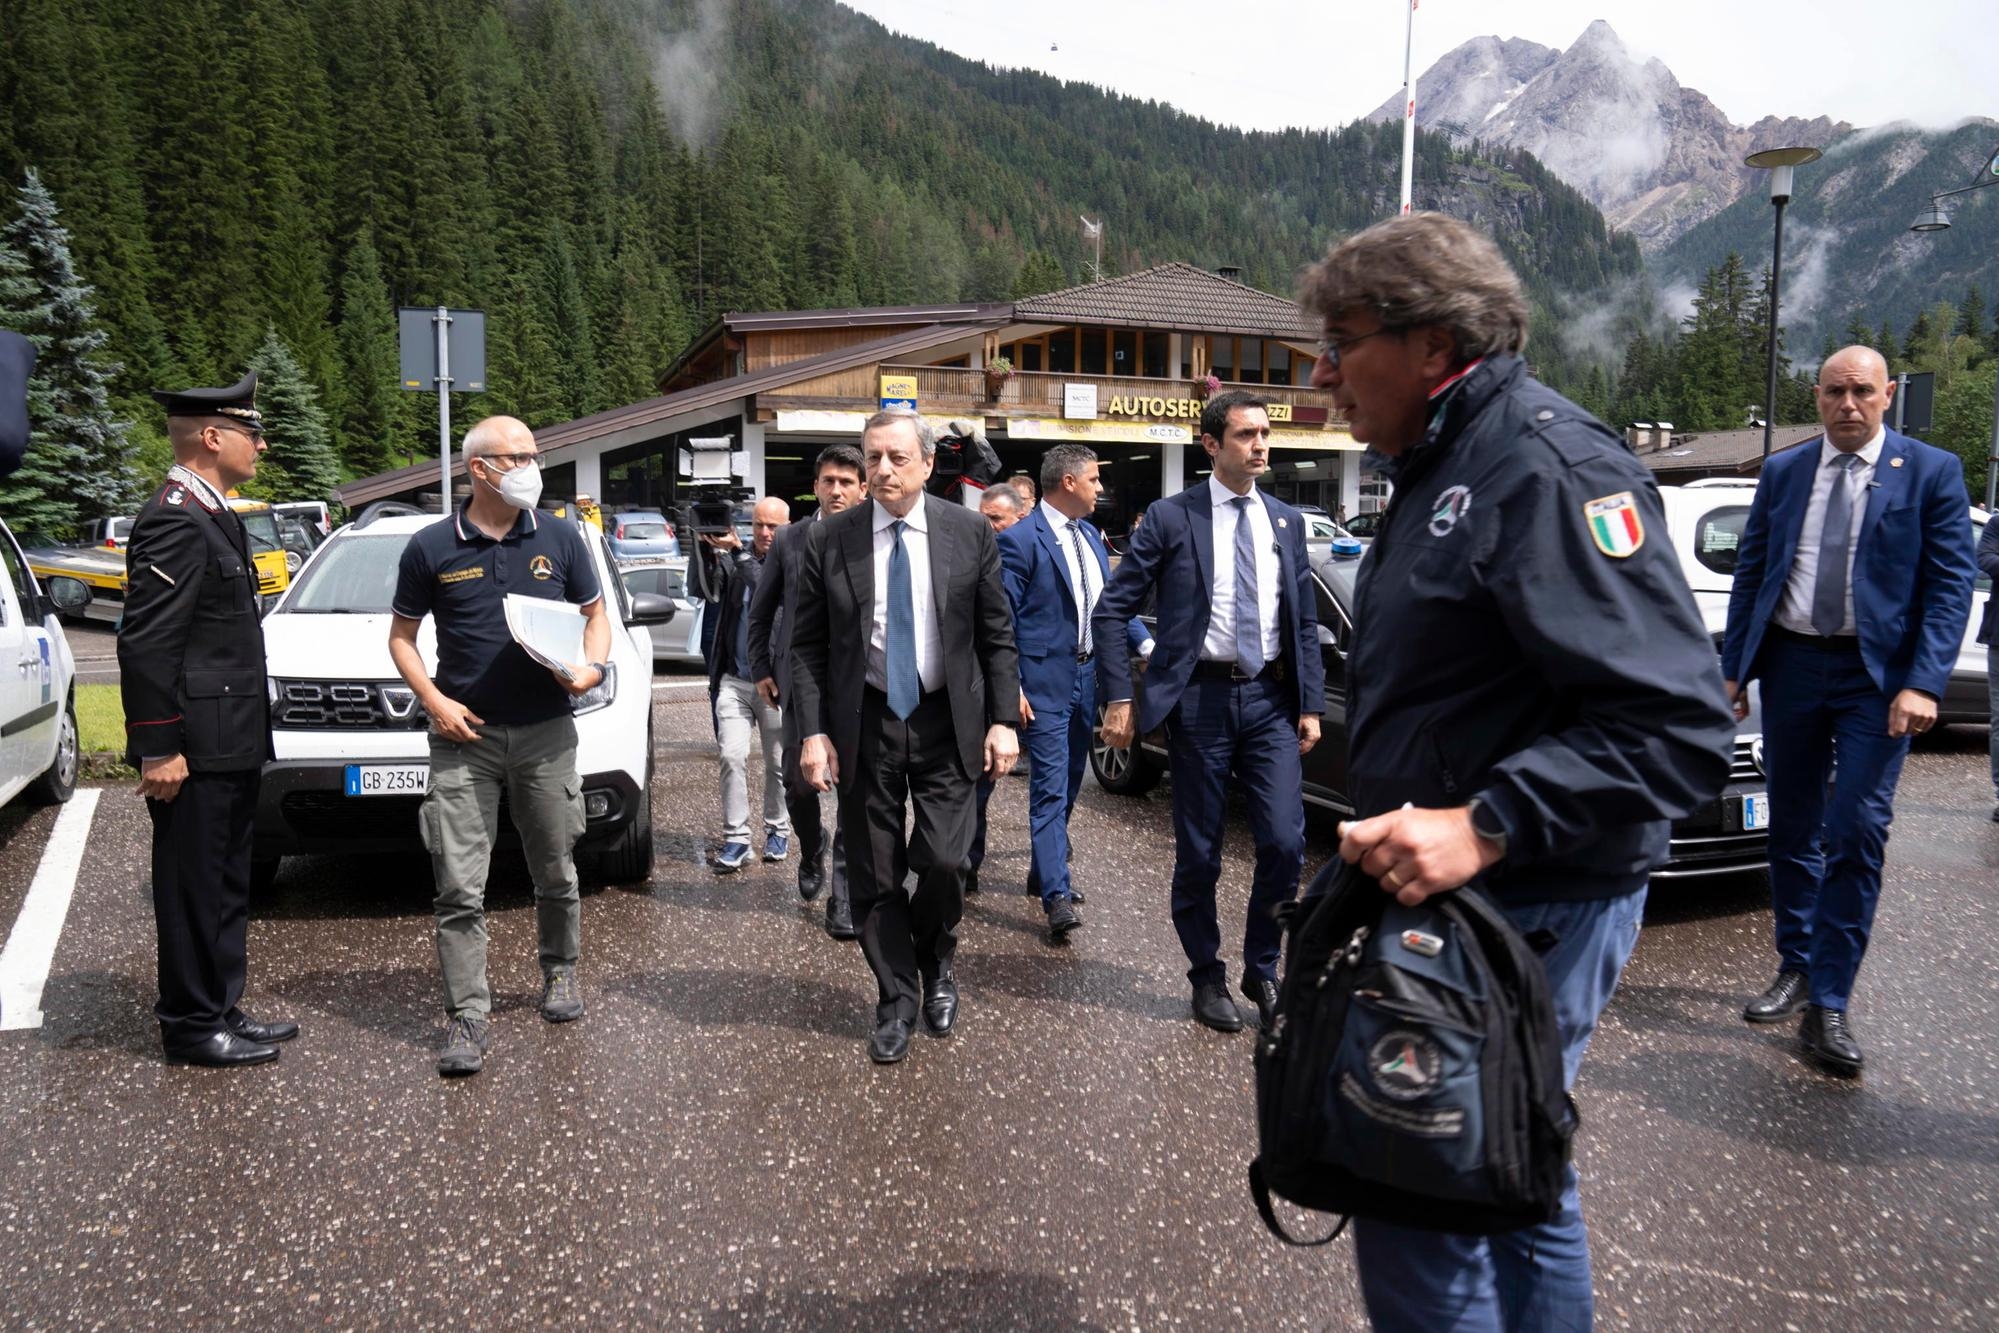 epa10051720 A handout photo made available by the Chigi Palace Press Office shows Italian Prime Minister Mario Draghi (C) visiting the base of operation for rescue efforts in the aftermath of an avalanche on the Marmolada Mountain, in Canazei, Italy, 04 July 2022. At least seven people were killed and more than a dozen were still missing on 04 July, a day after a glacier collapsed triggering an avalanche on the multi-peak mountain of the Italian Dolomites. The temperature on the glacier on 03 July was measured at a record 10 degrees Celsius. EPA/Filippo Attili - Chigi Palace Press Office HANDOUT HANDOUT EDITORIAL USE ONLY/NO SALES